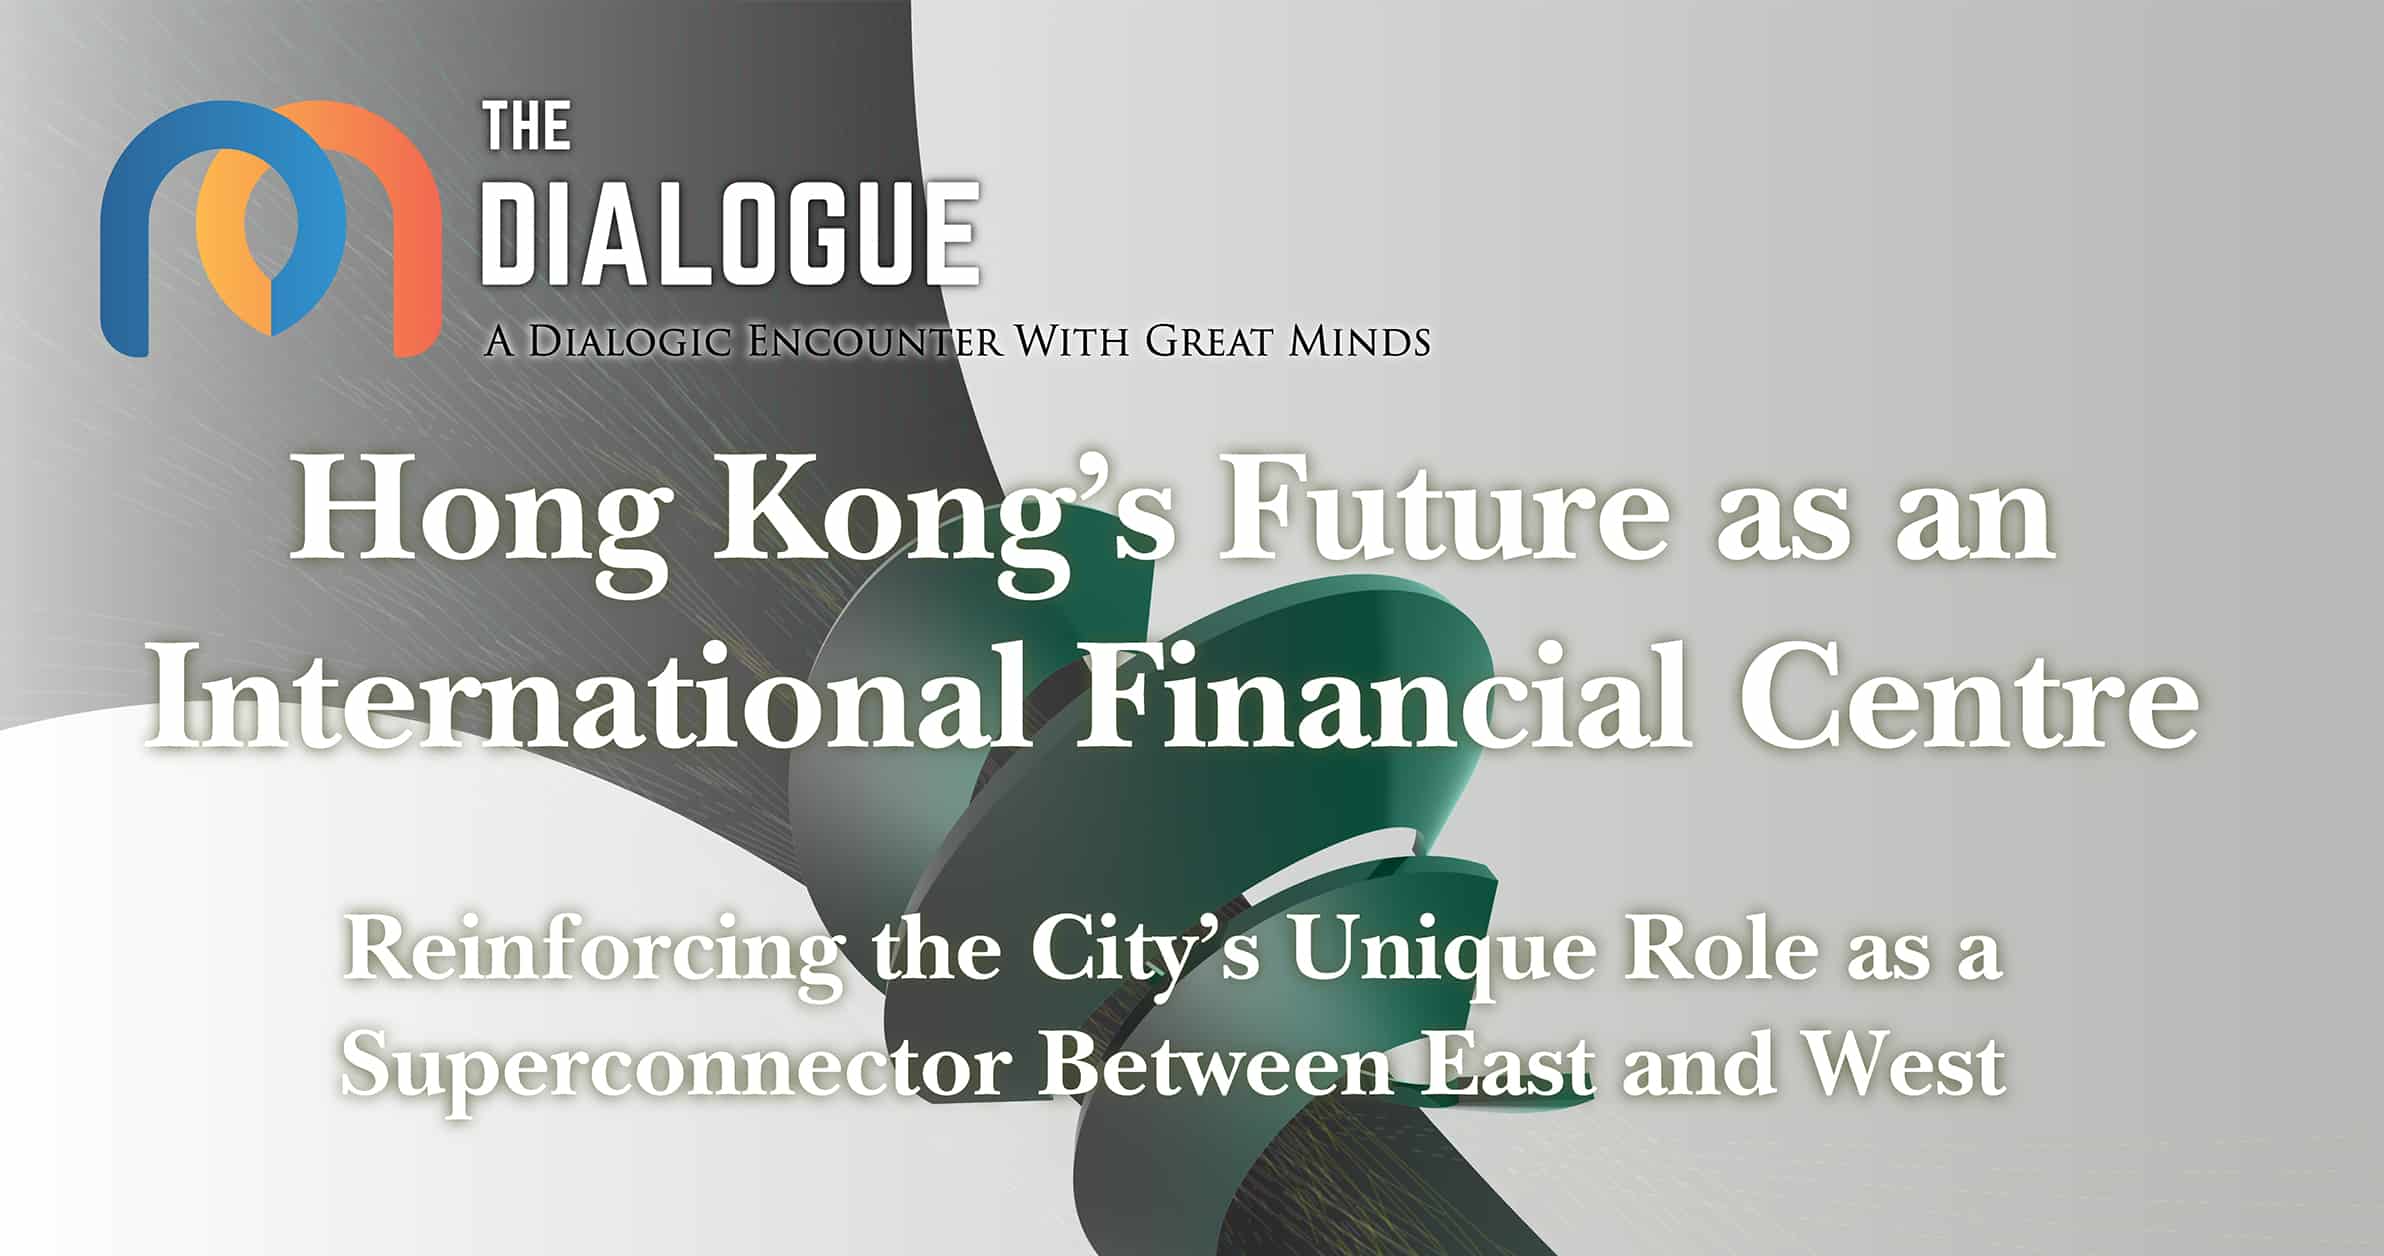 The Dialogue Hong Kong’s Future as an International Financial Centre: Reinforcing the City’s Unique Role as a Superconnector Between East and West